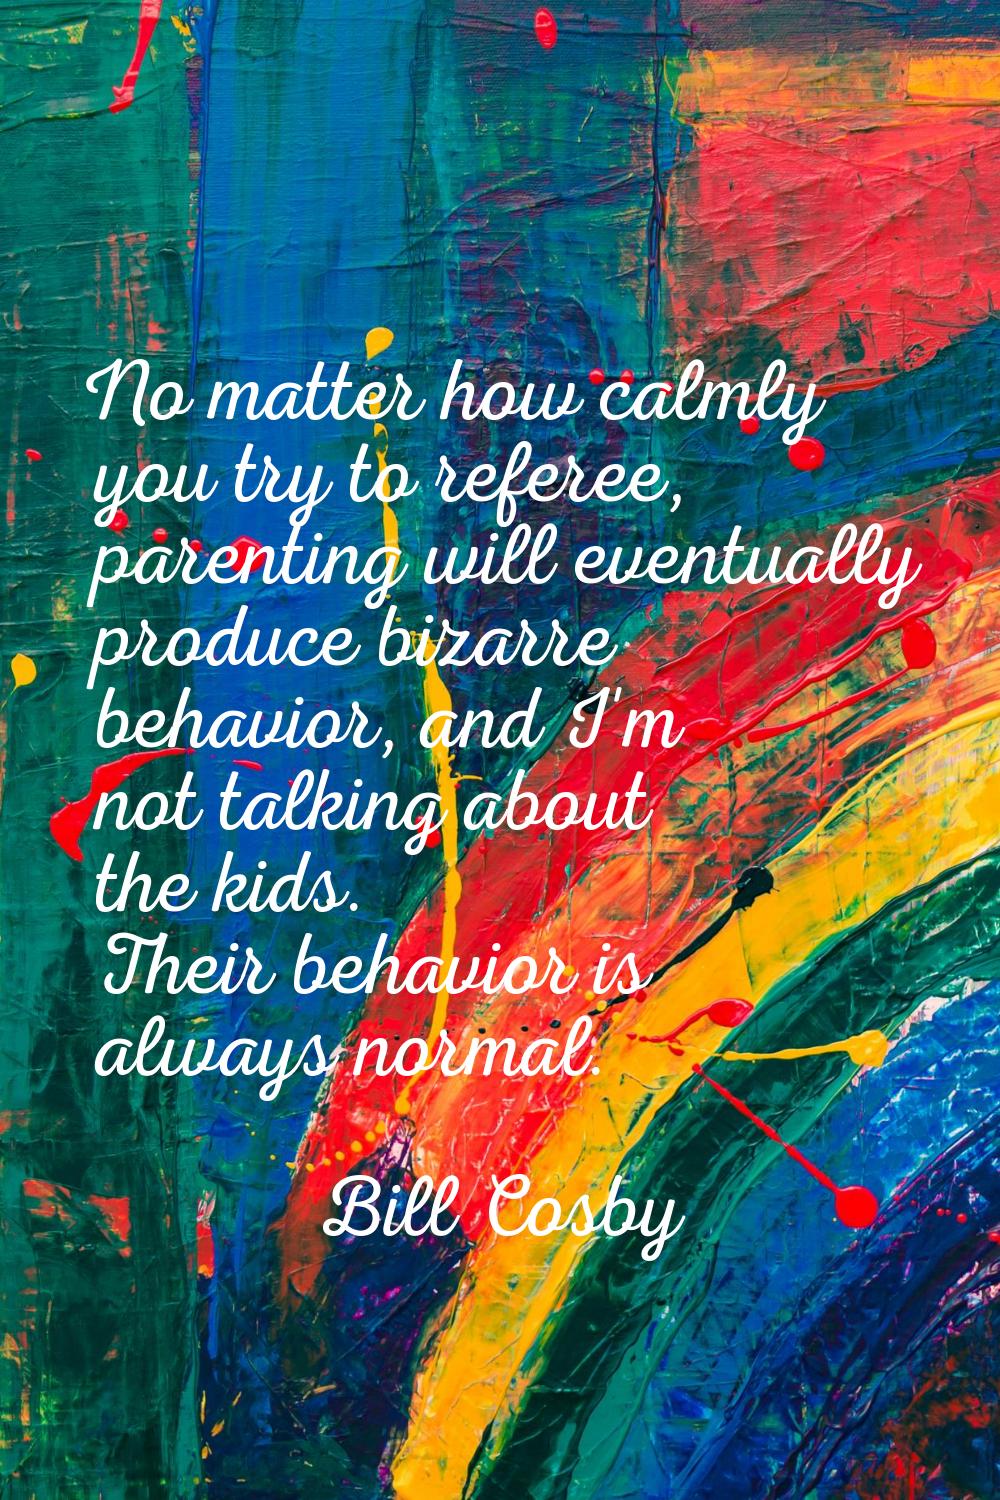 No matter how calmly you try to referee, parenting will eventually produce bizarre behavior, and I'